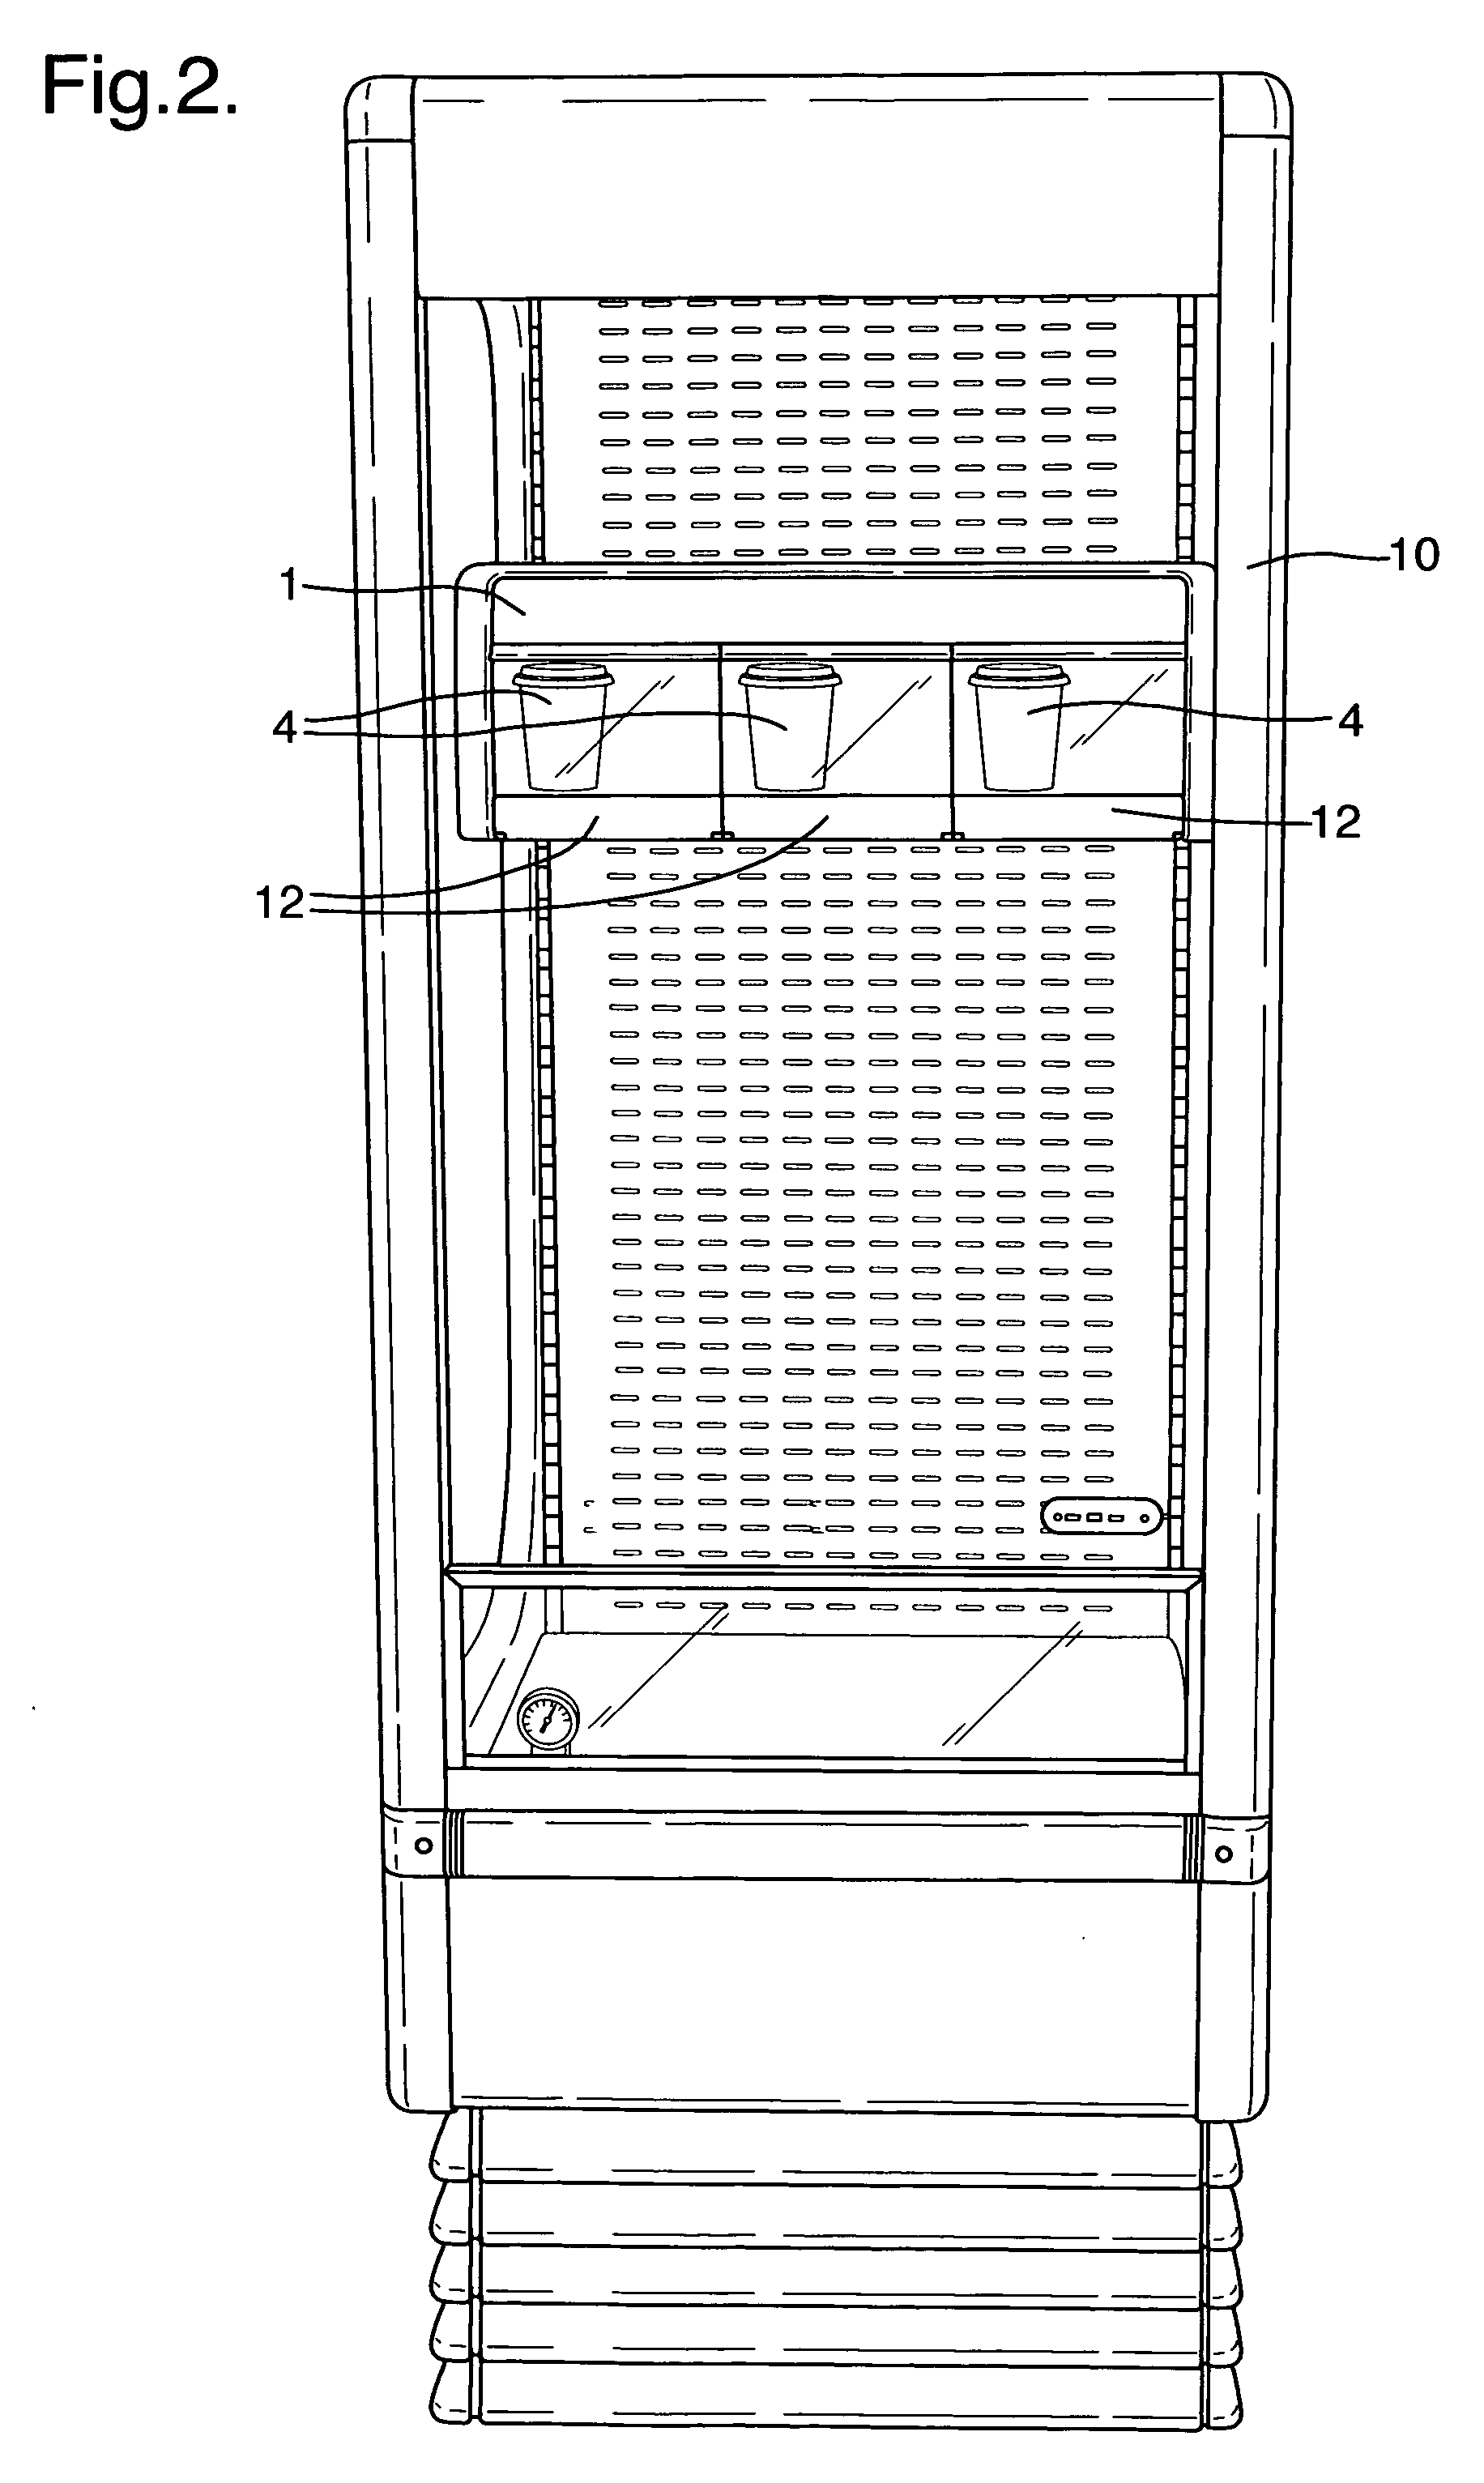 Apparatus and method for displaying and dispensing frozen edible products